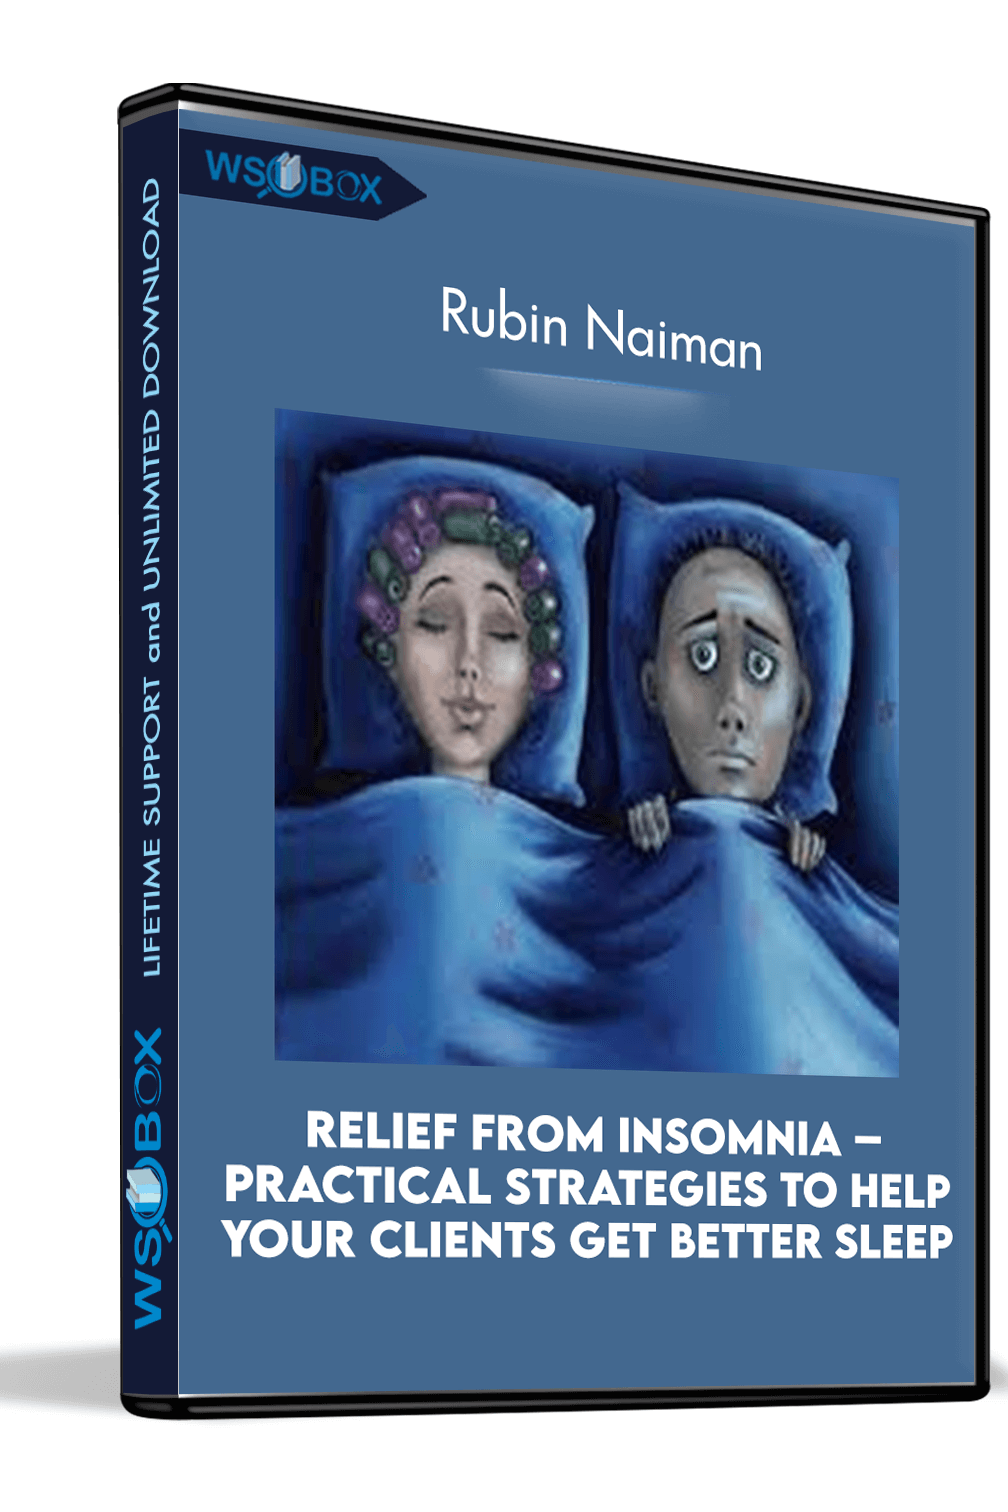 Relief from Insomnia – Practical Strategies to Help Your Clients Get Better Sleep – Rubin Naiman